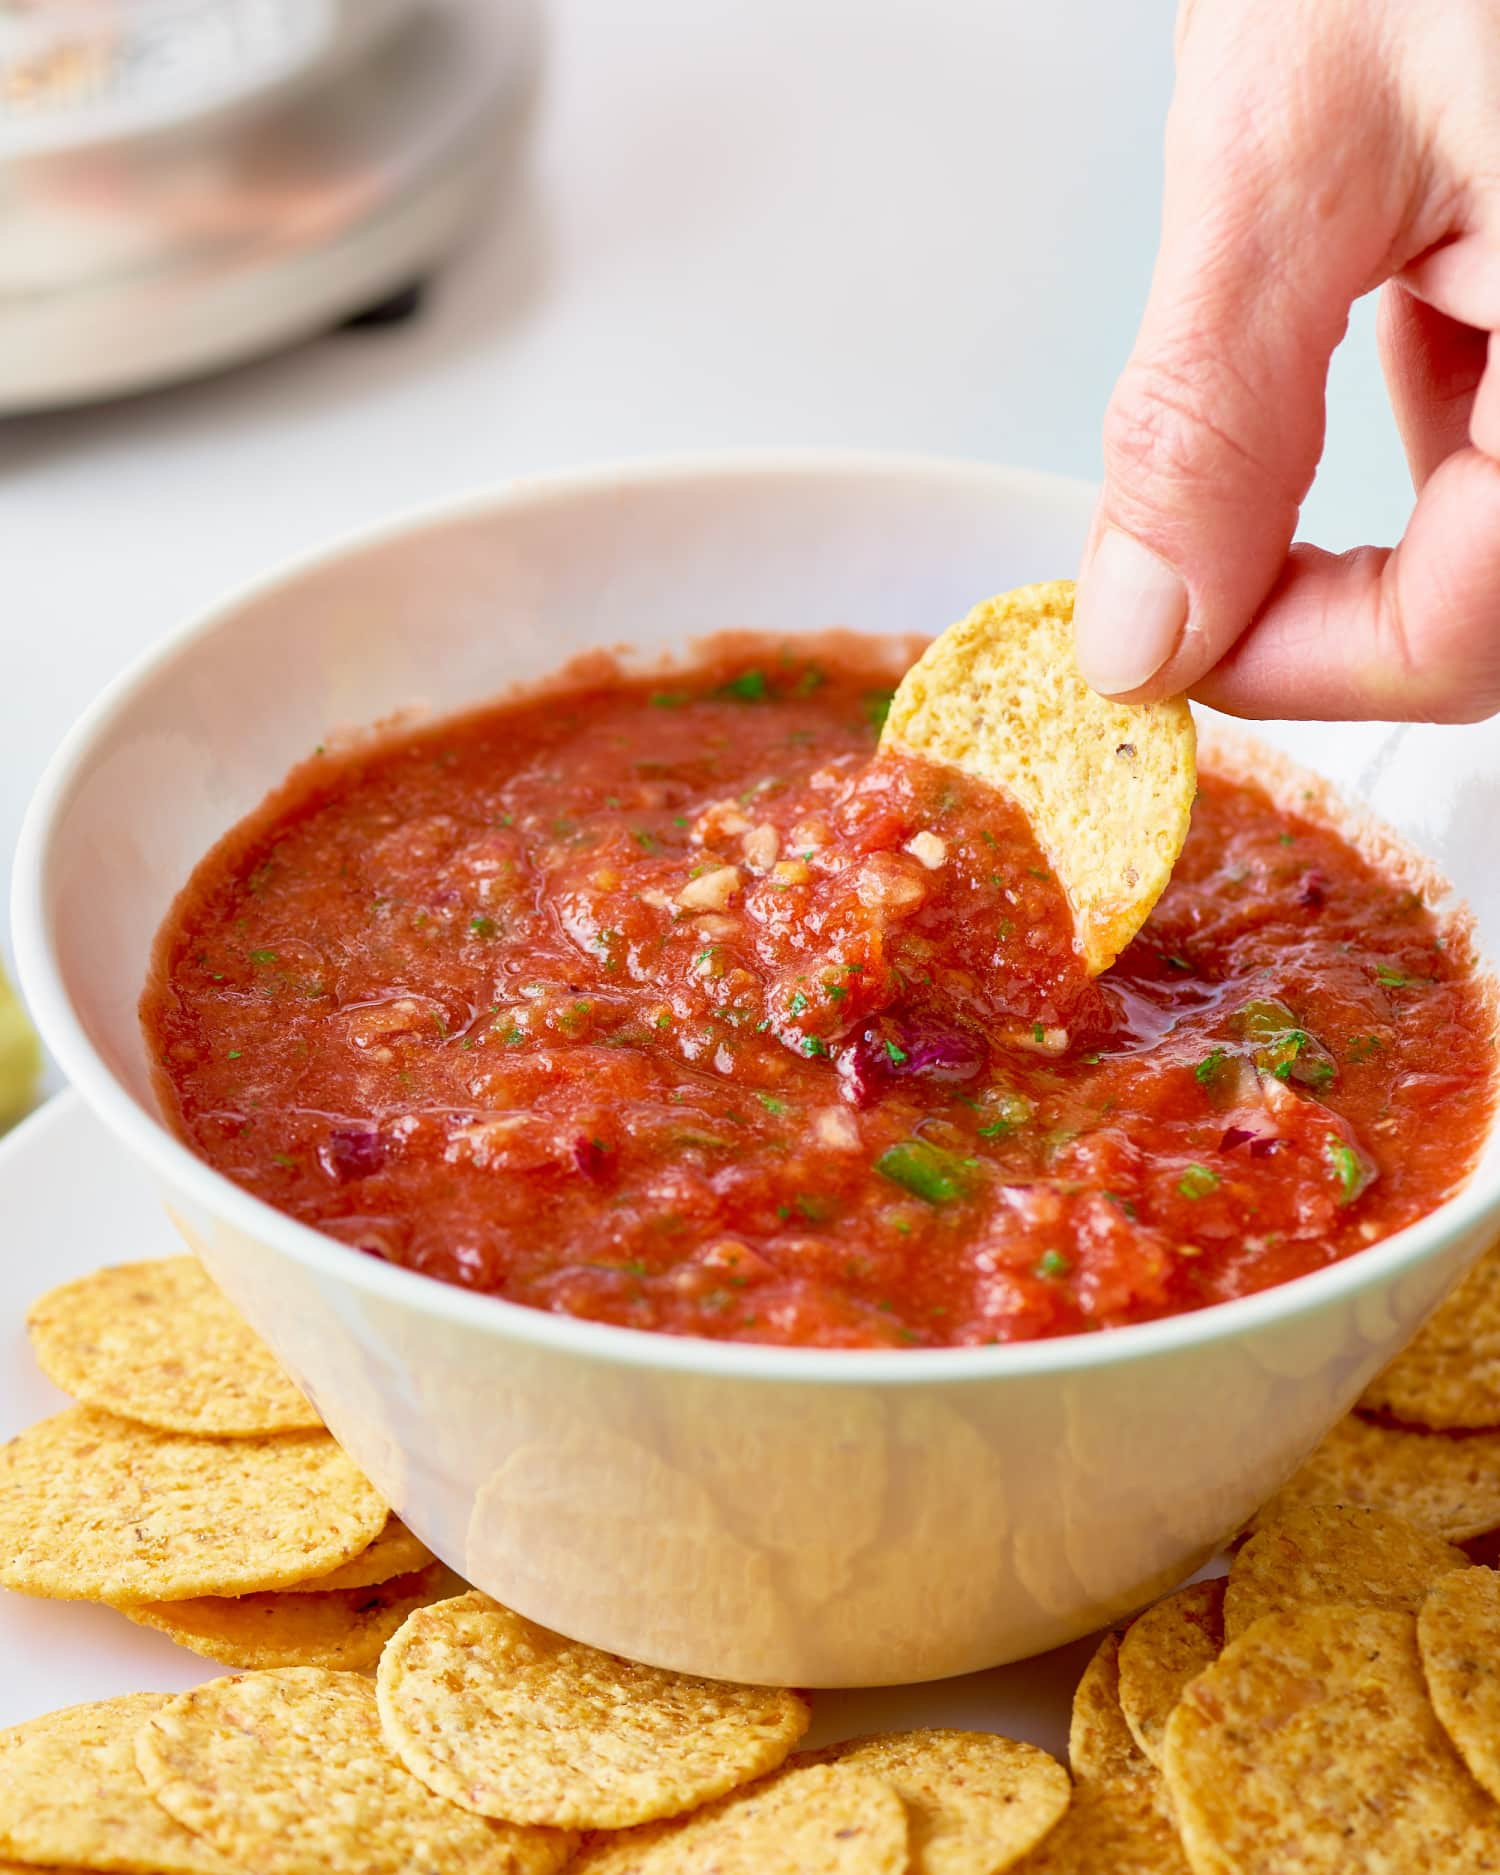 Chips And Salsa Recipe
 How To Make Restaurant Style Salsa in a Blender